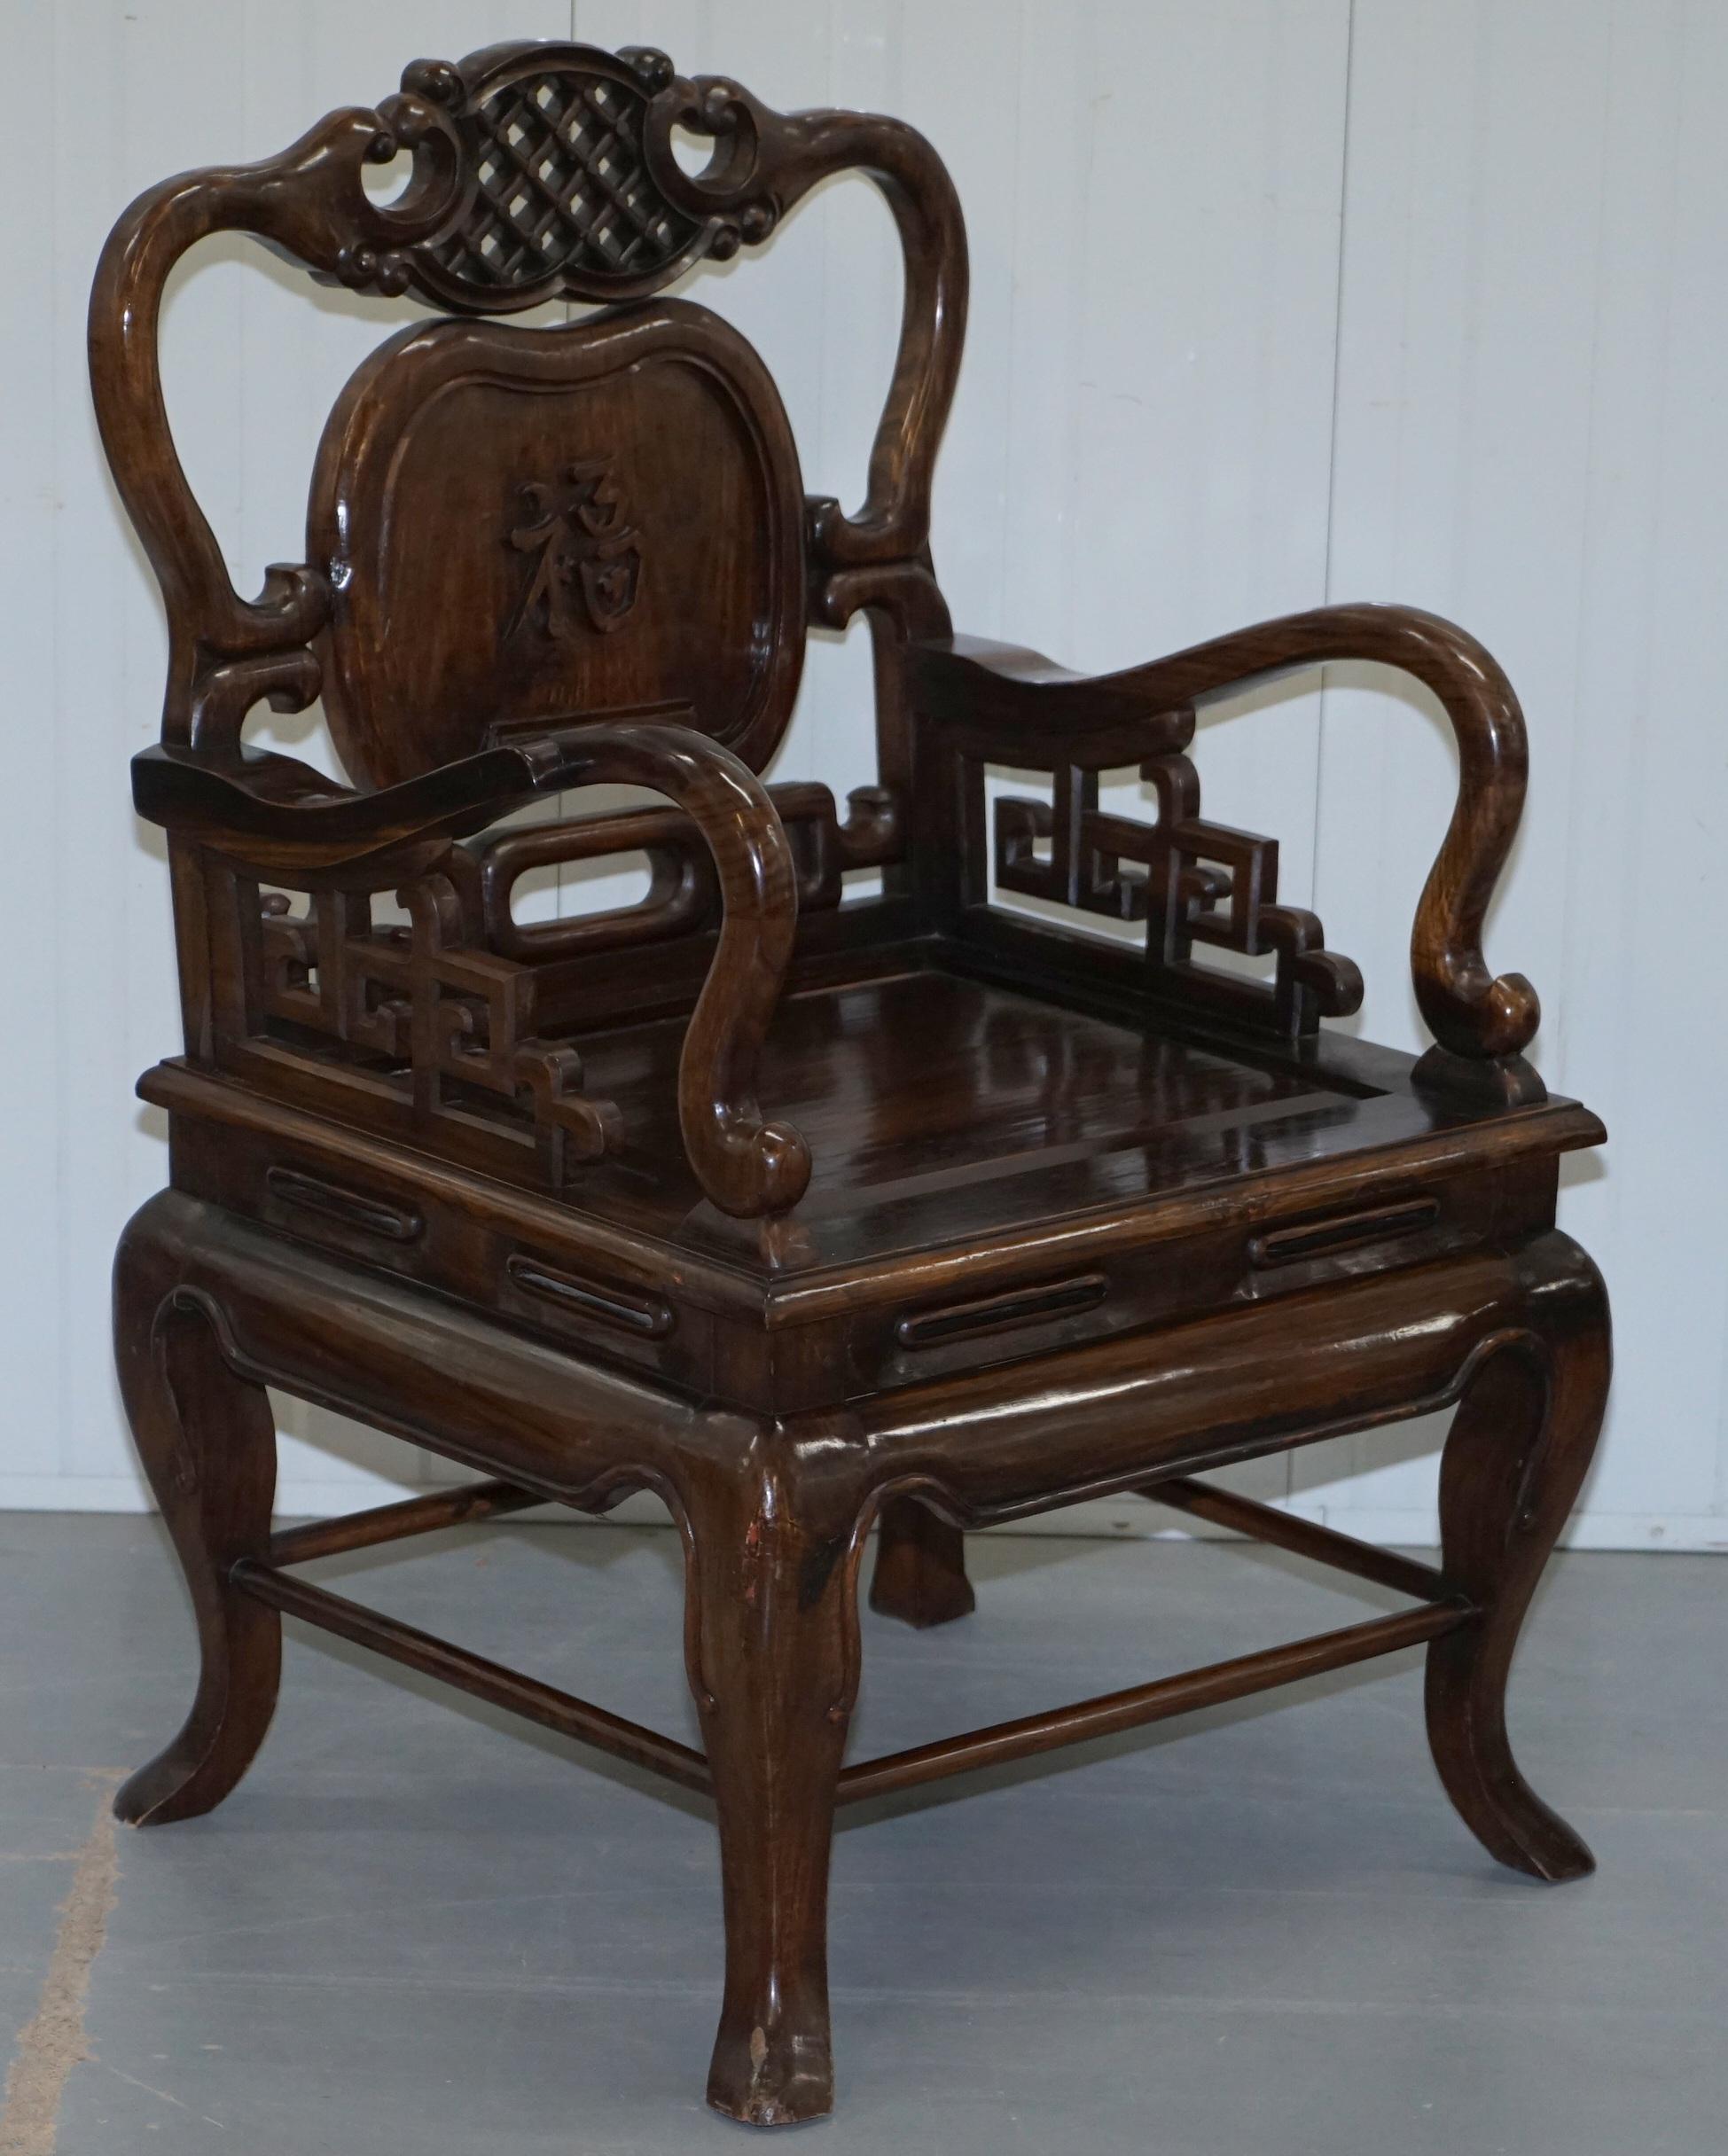 We are delighted to offer for sale this lovely original pair of Chinese Quin dynasty late 19th early-20th century very heavy solid hardwood Emperor Throne armchairs.

A very good looking and decorative pair, the timber has a glorious patina, just